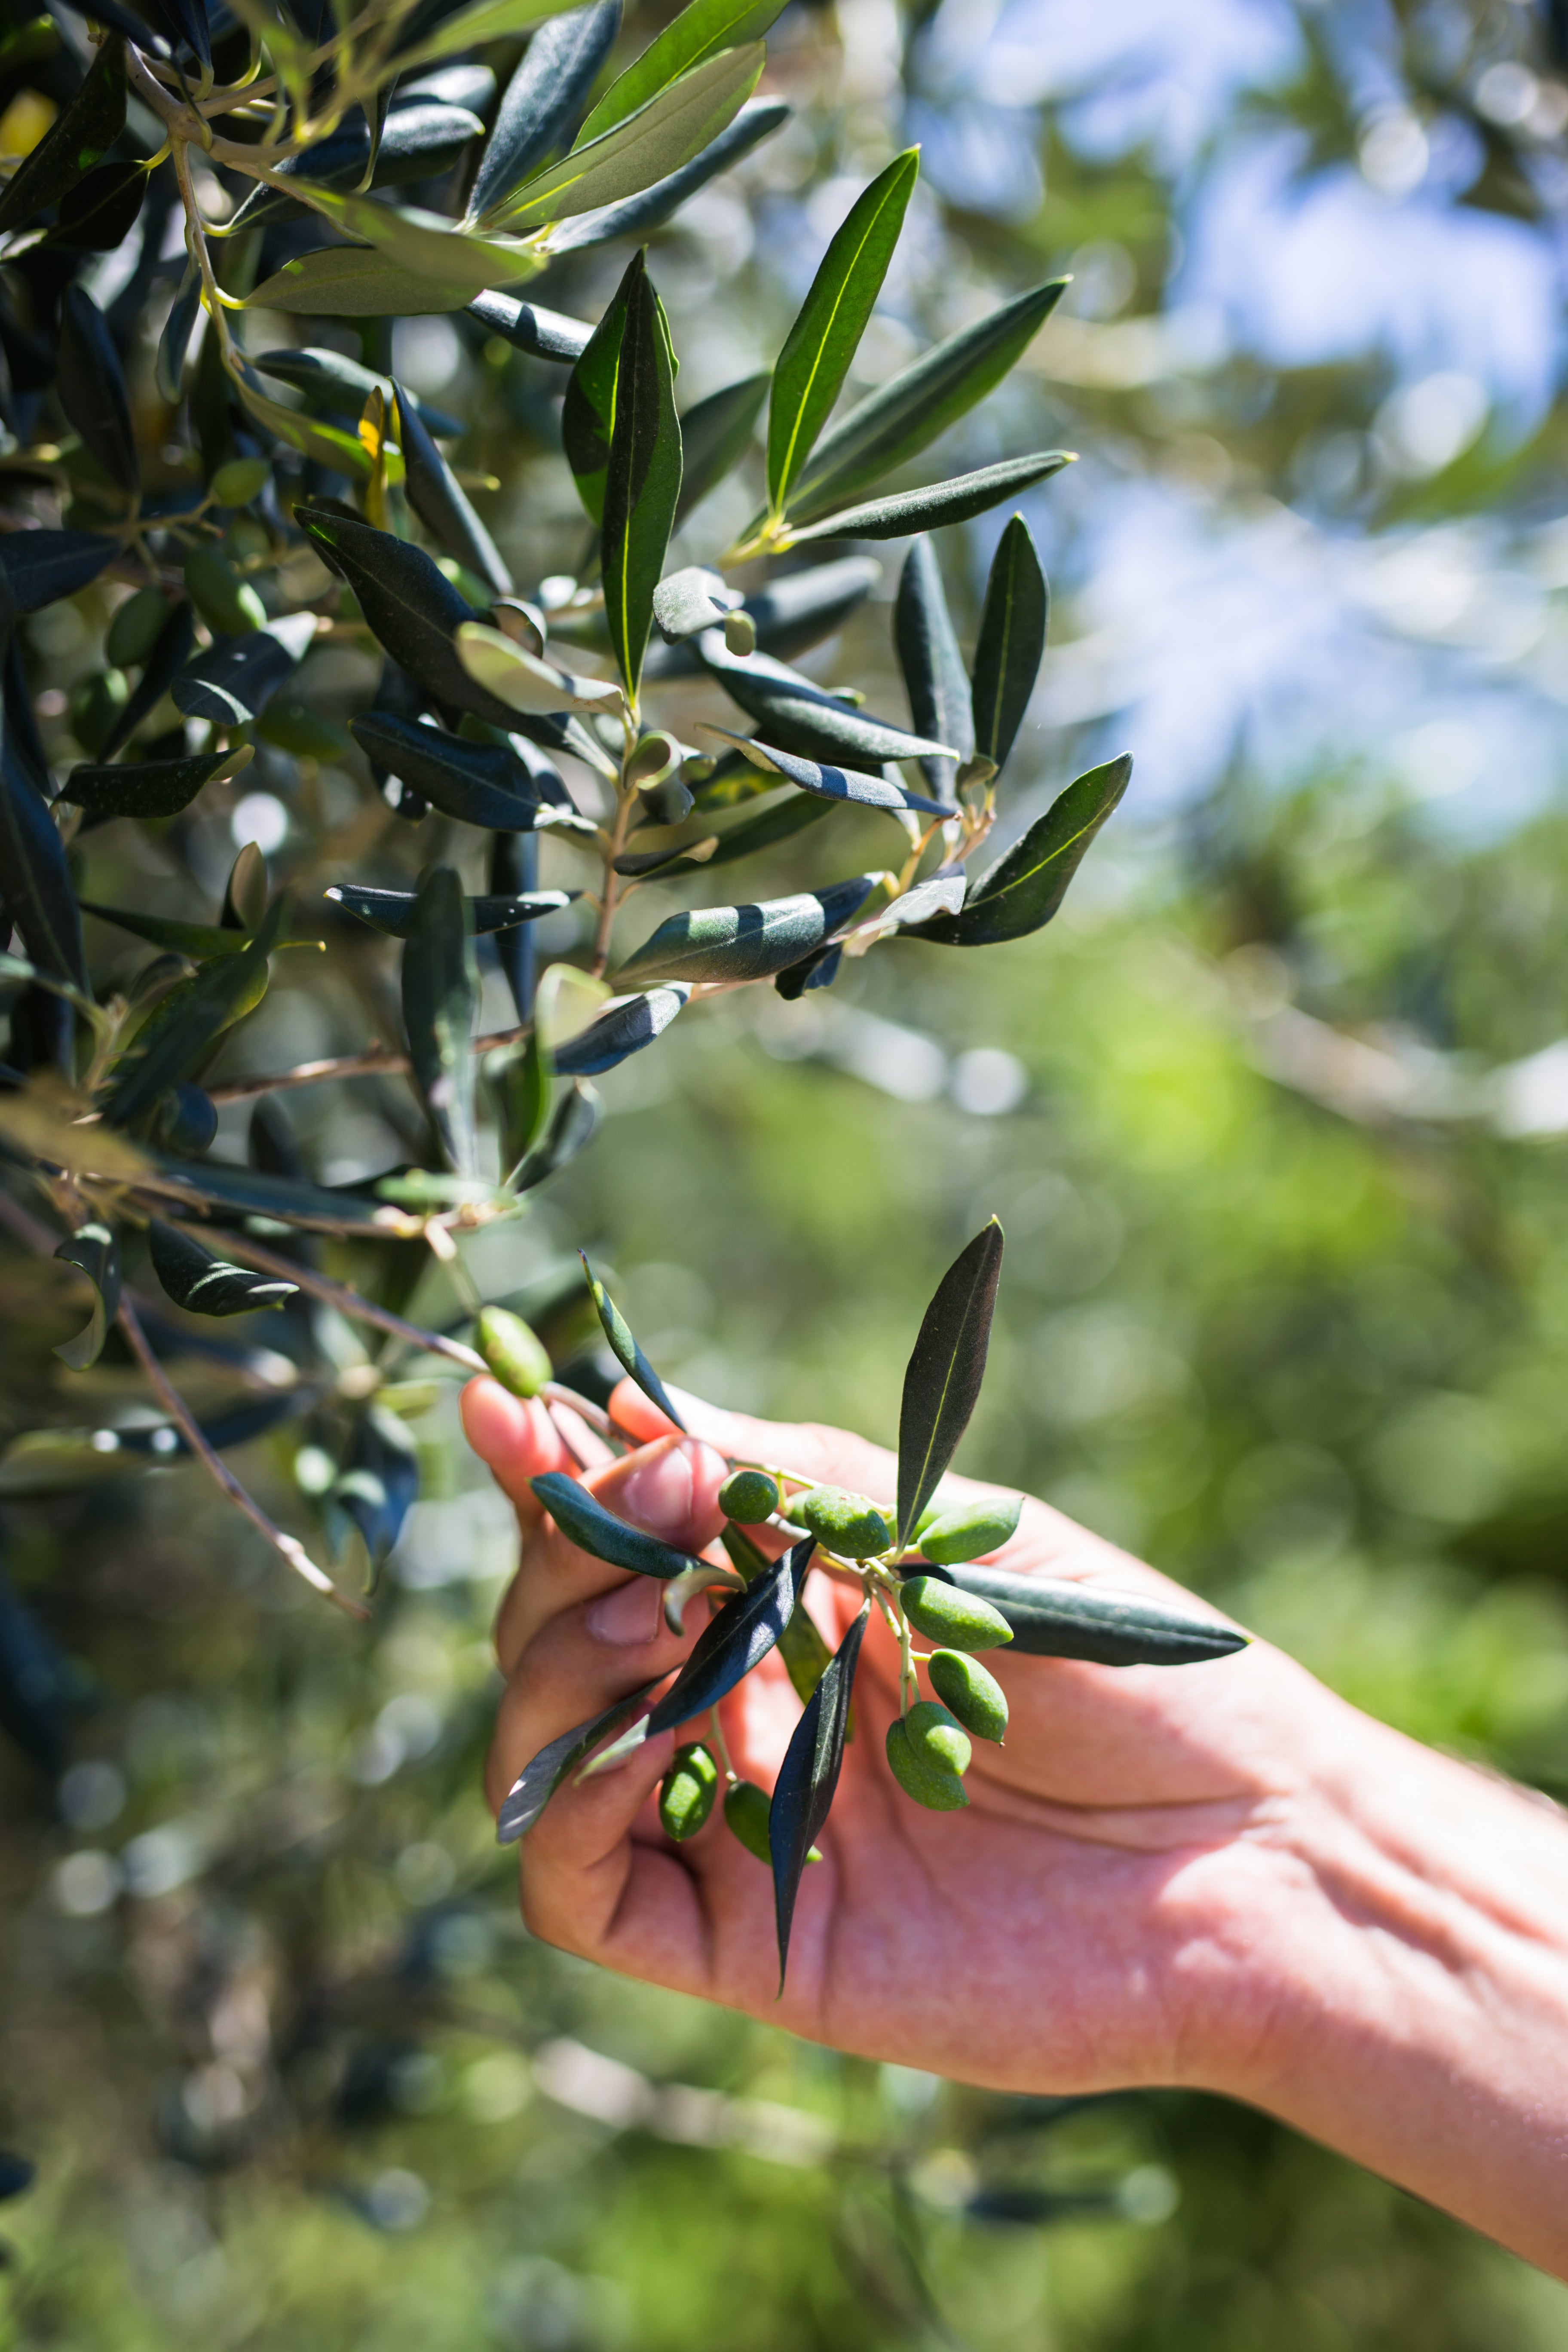 The journey of the olive